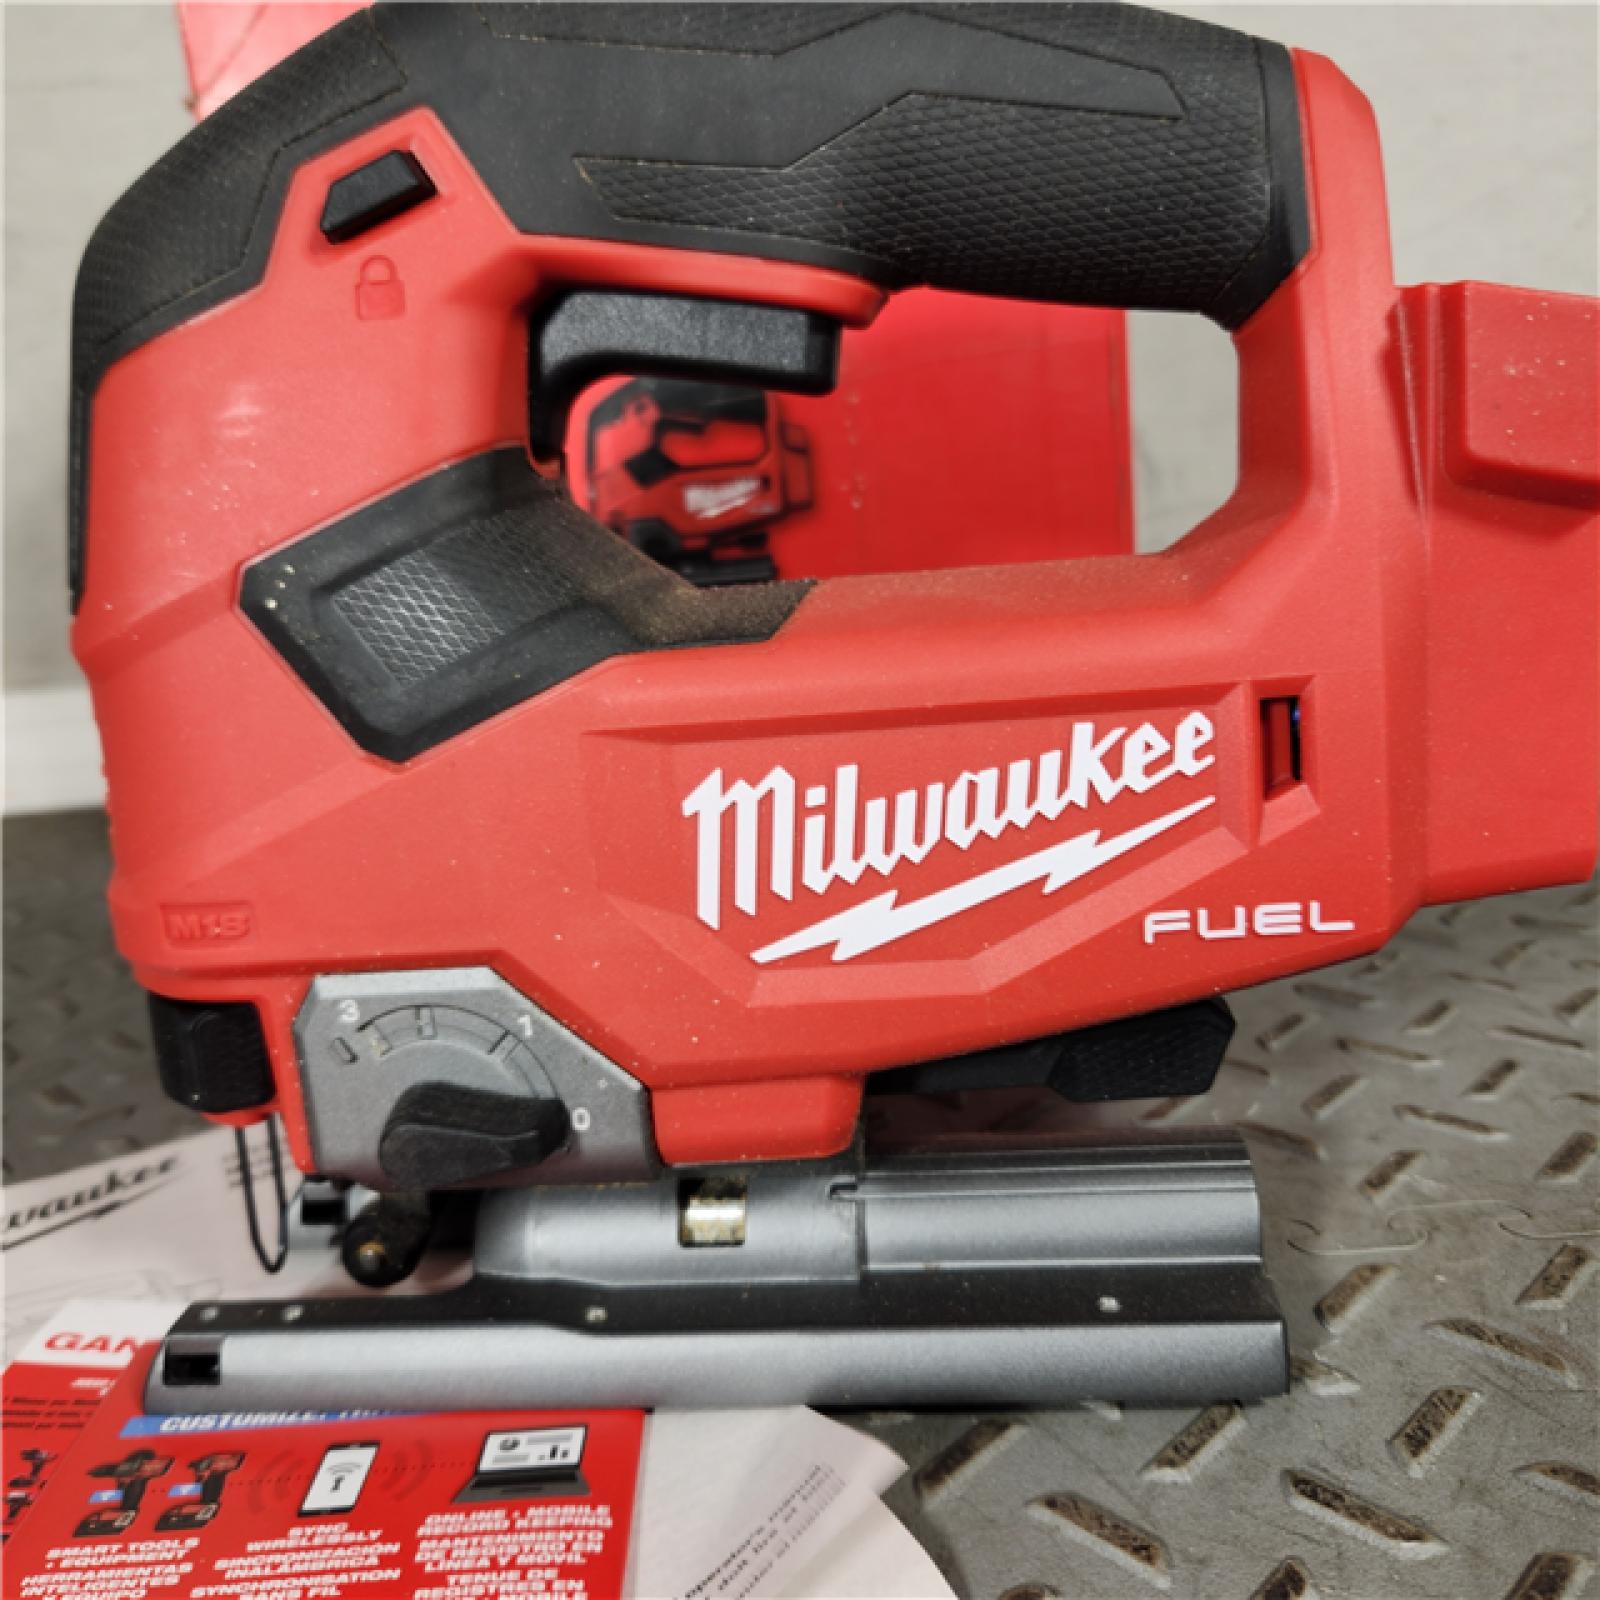 Houston location- AS-IS Milwaukee M18 FUEL Cordless D-Handle Jig Saw (Tool Only), 2737-20